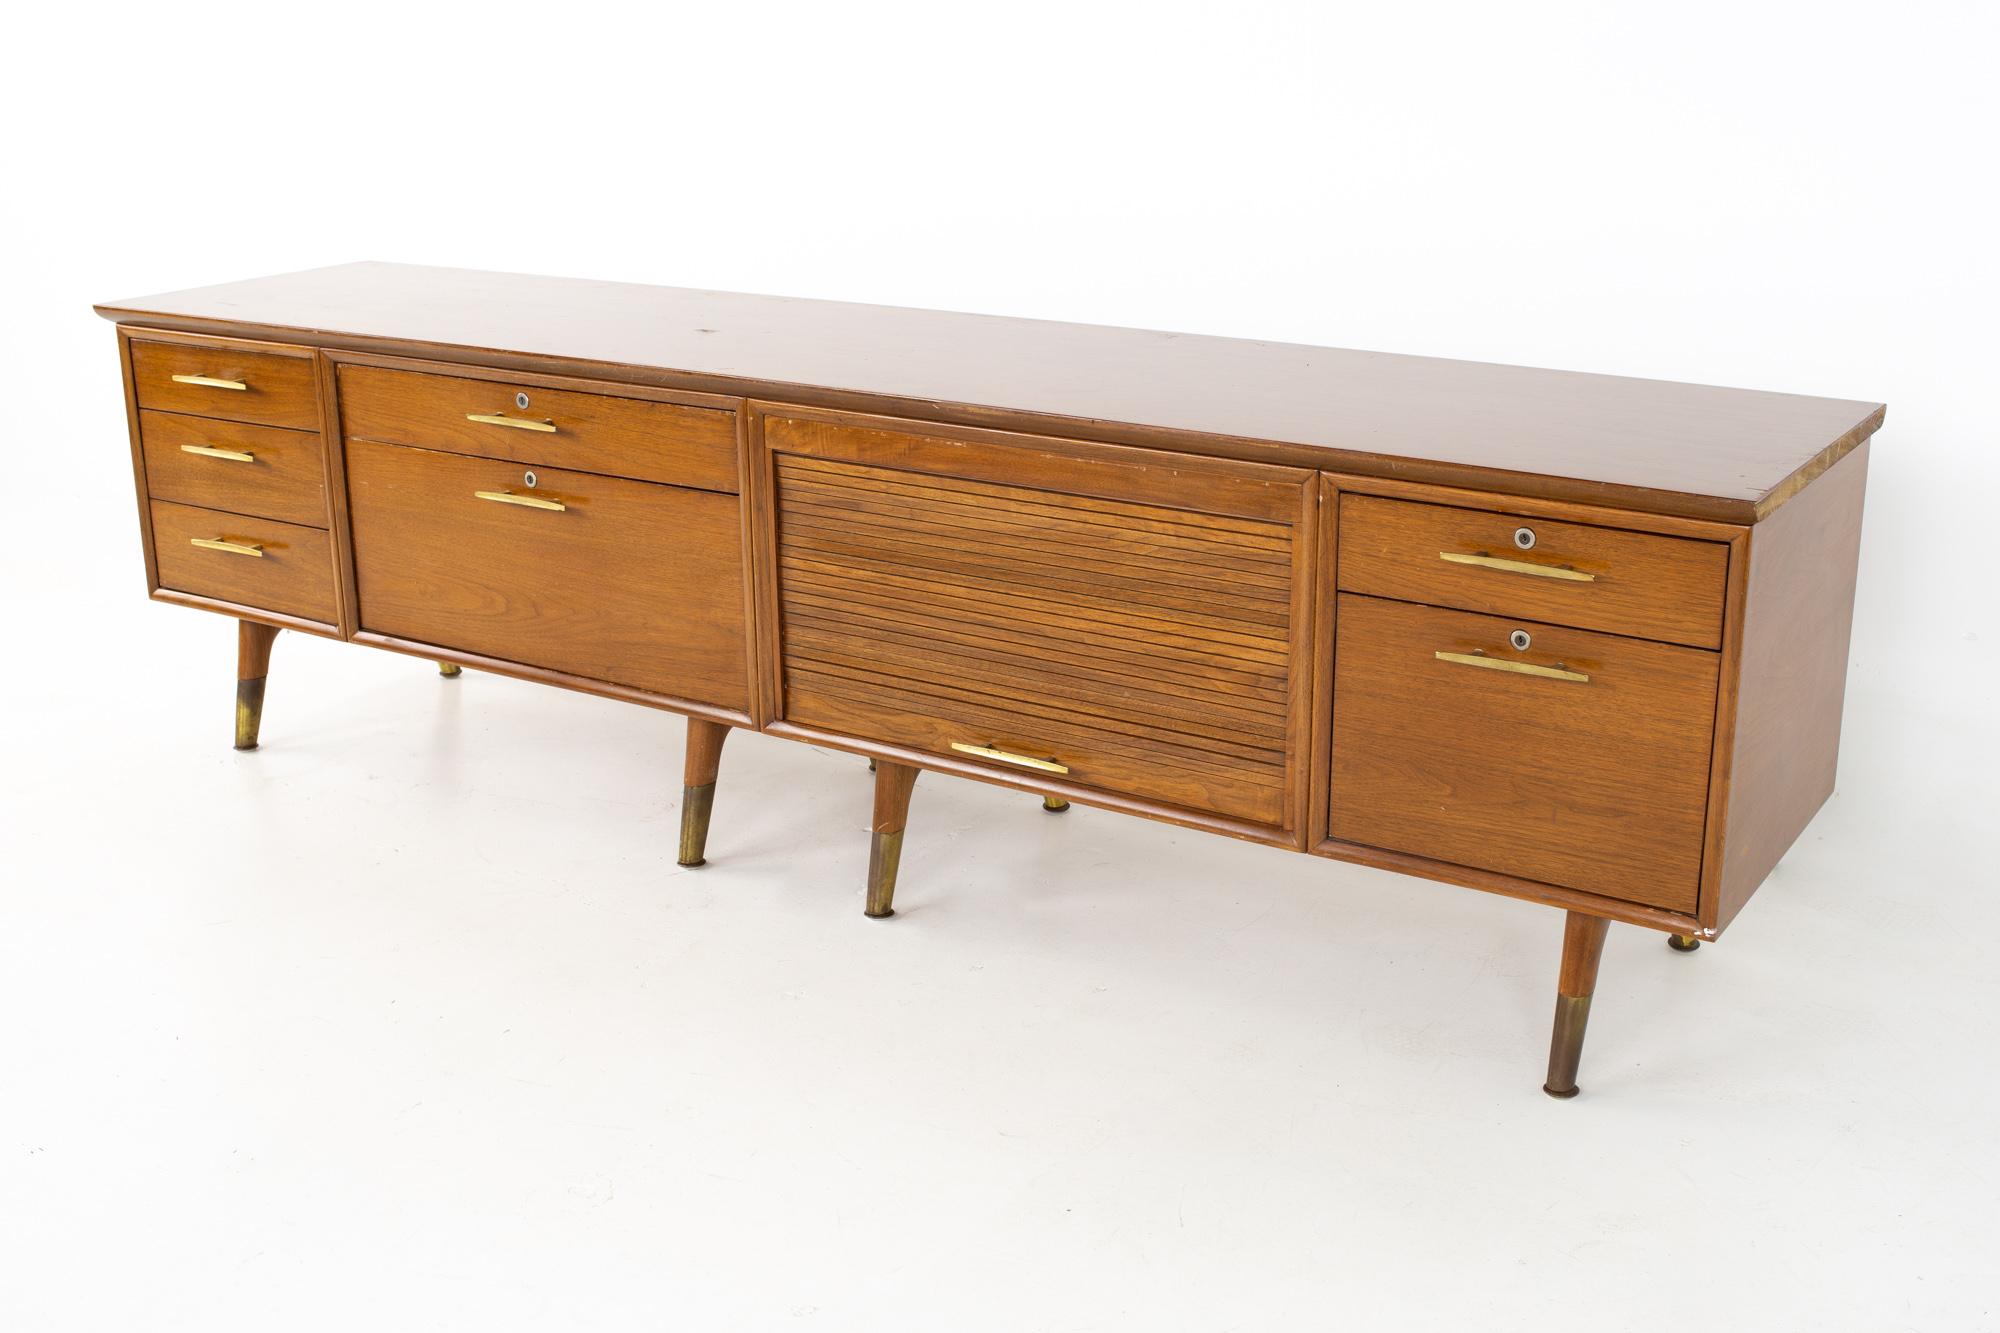 Standard Furniture Company mid century walnut and brass Tambour sideboard buffet credenza
Credenza measures: 95 wide x 21 wide x 27 inches high

All pieces of furniture can be had in what we call restored vintage condition. That means the piece